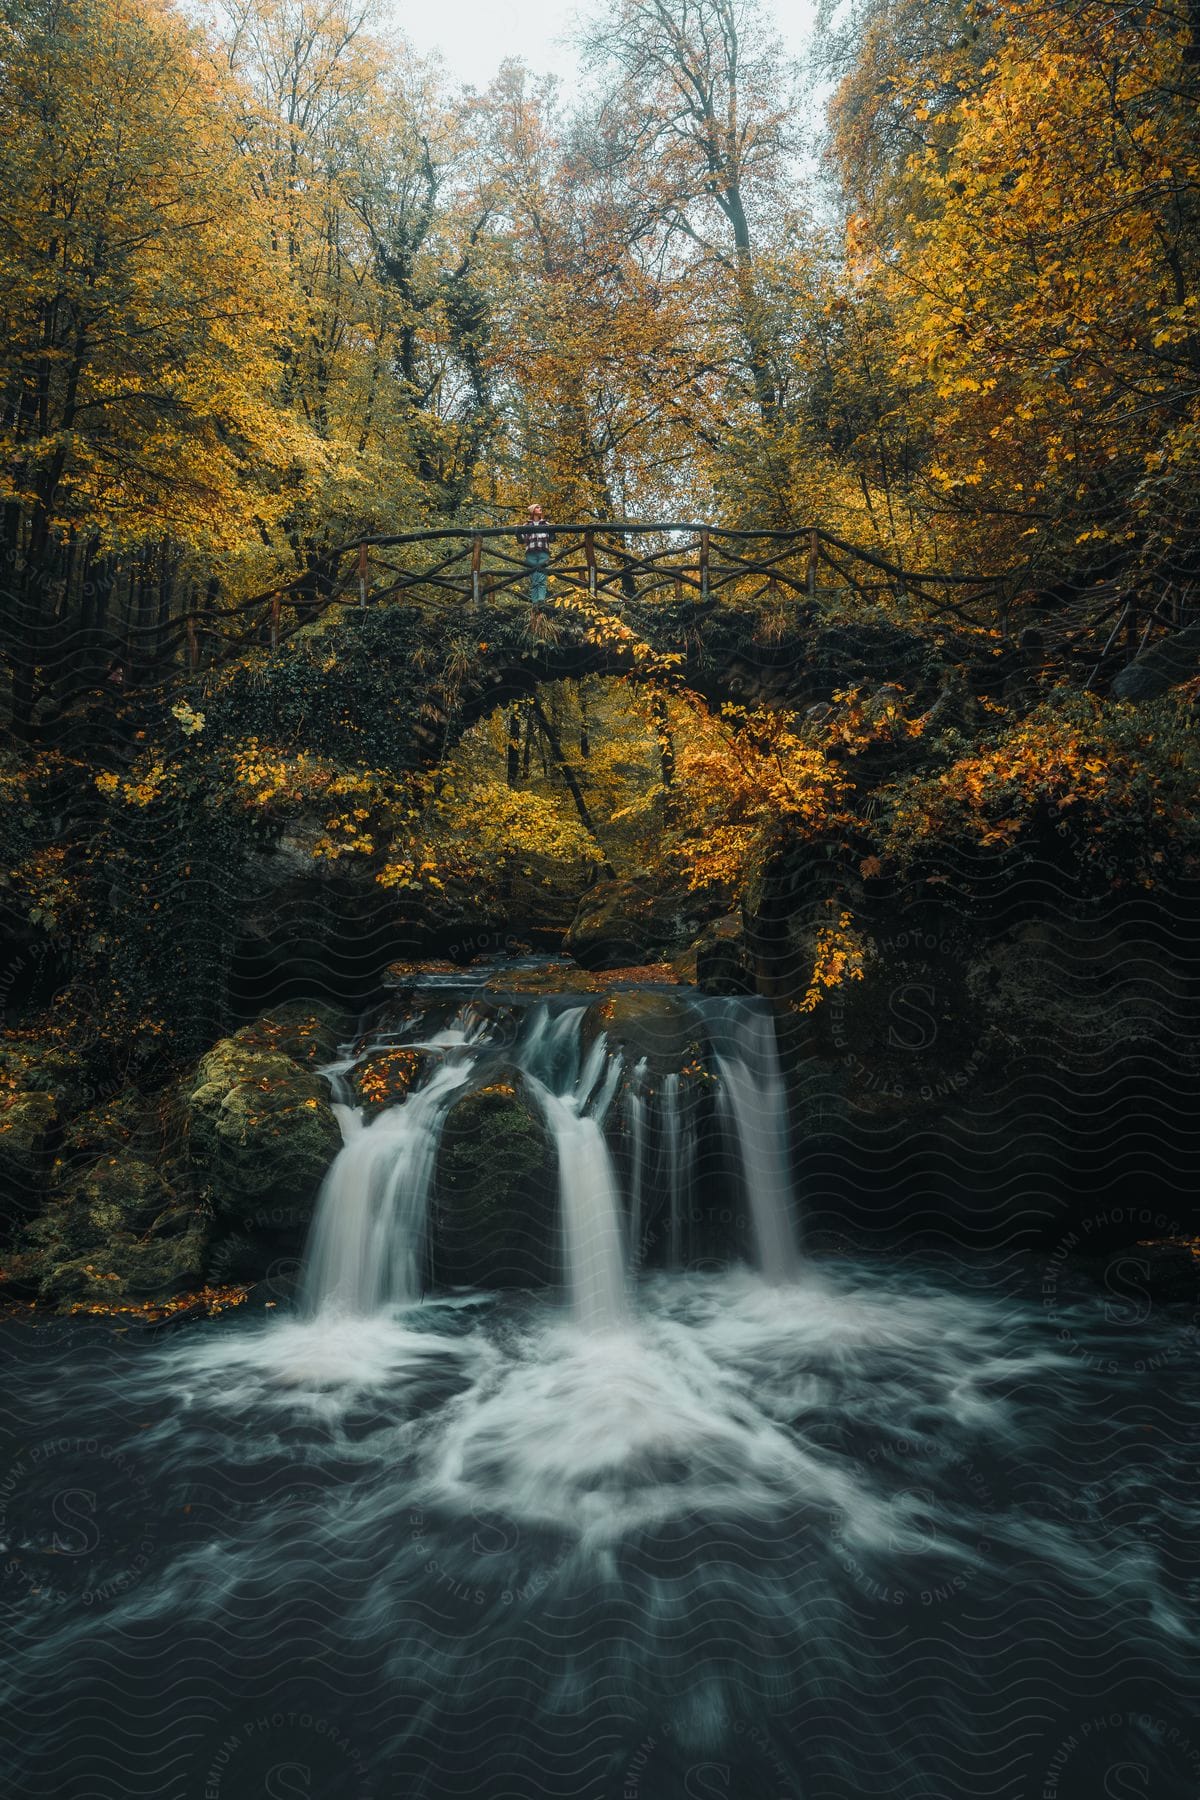 A forest waterfall with a bridge hanging over the water.